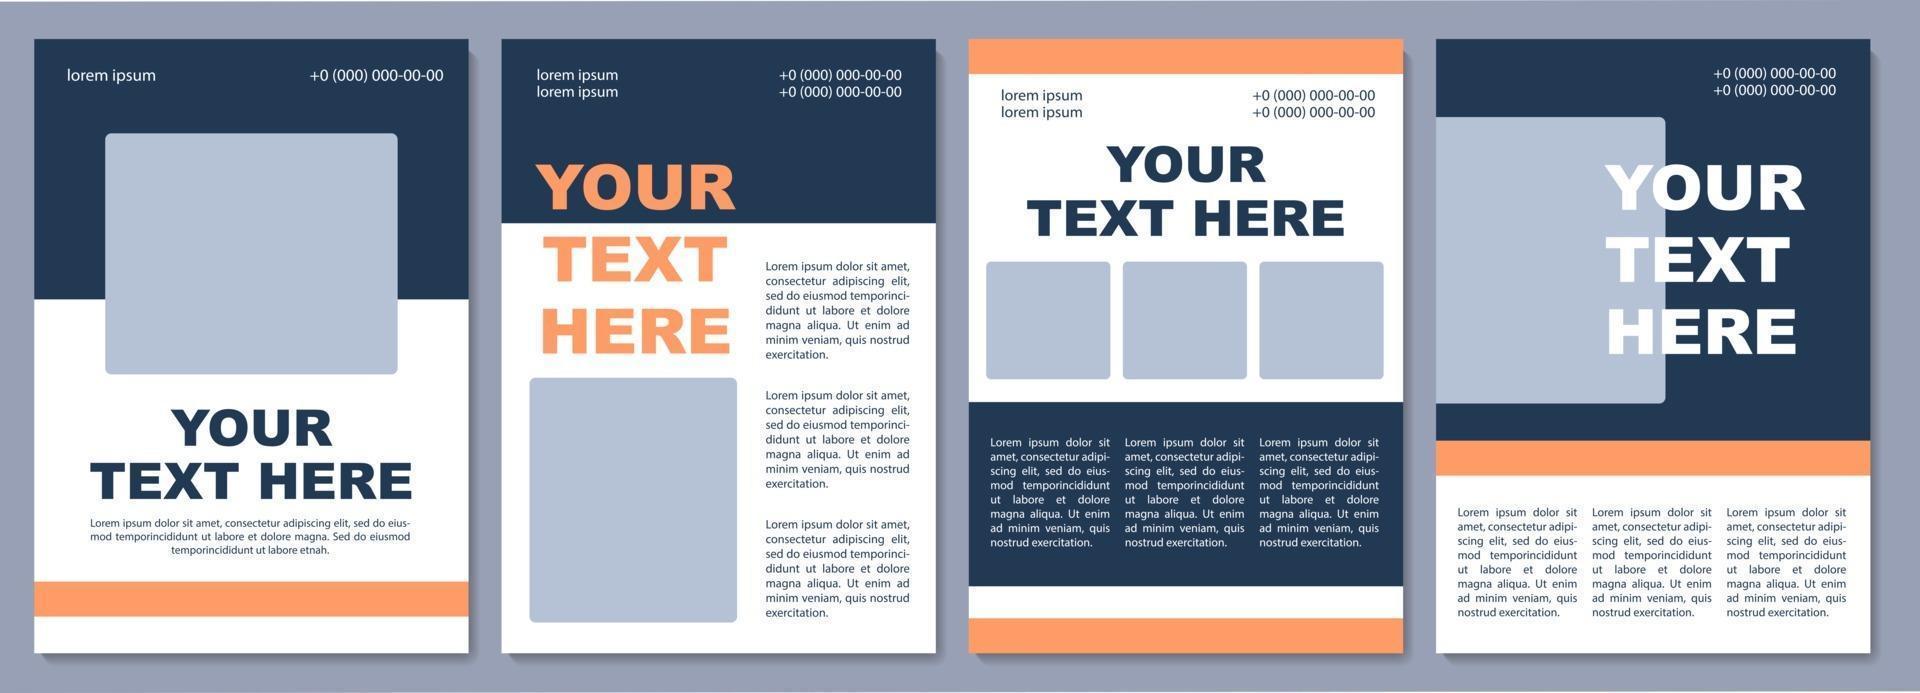 Tourism brochure template. Effect on decision making. Flyer, booklet, leaflet print, cover design with copy space. Your text here. Vector layouts for magazines, annual reports, advertising posters